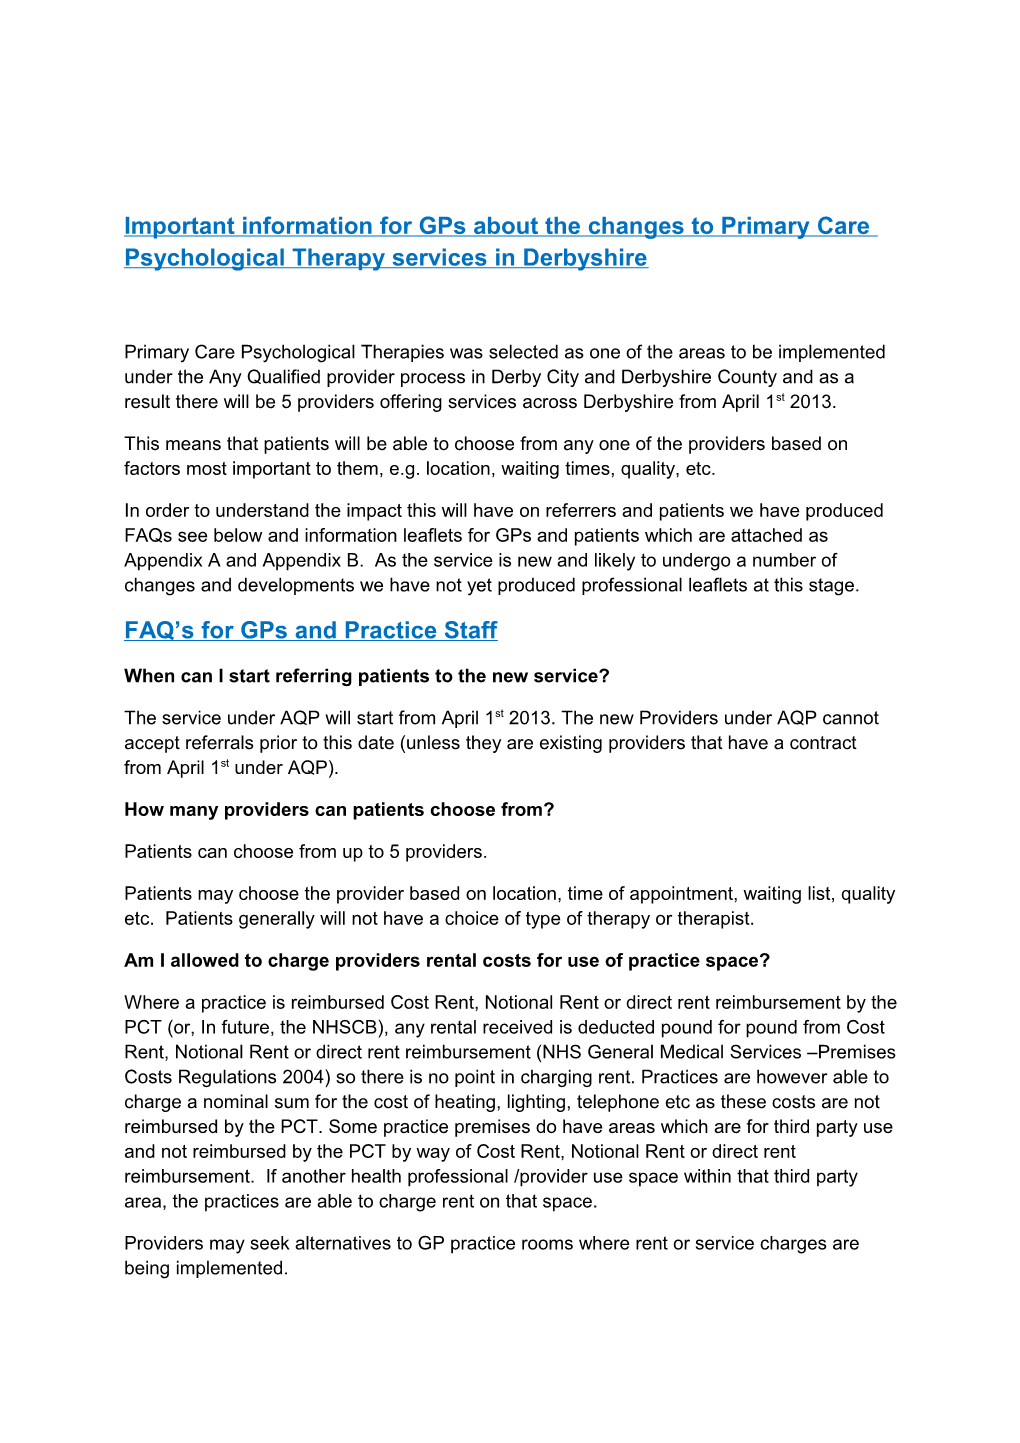 Important Information for Gps About the Changes to Primary Care Psychological Therapy